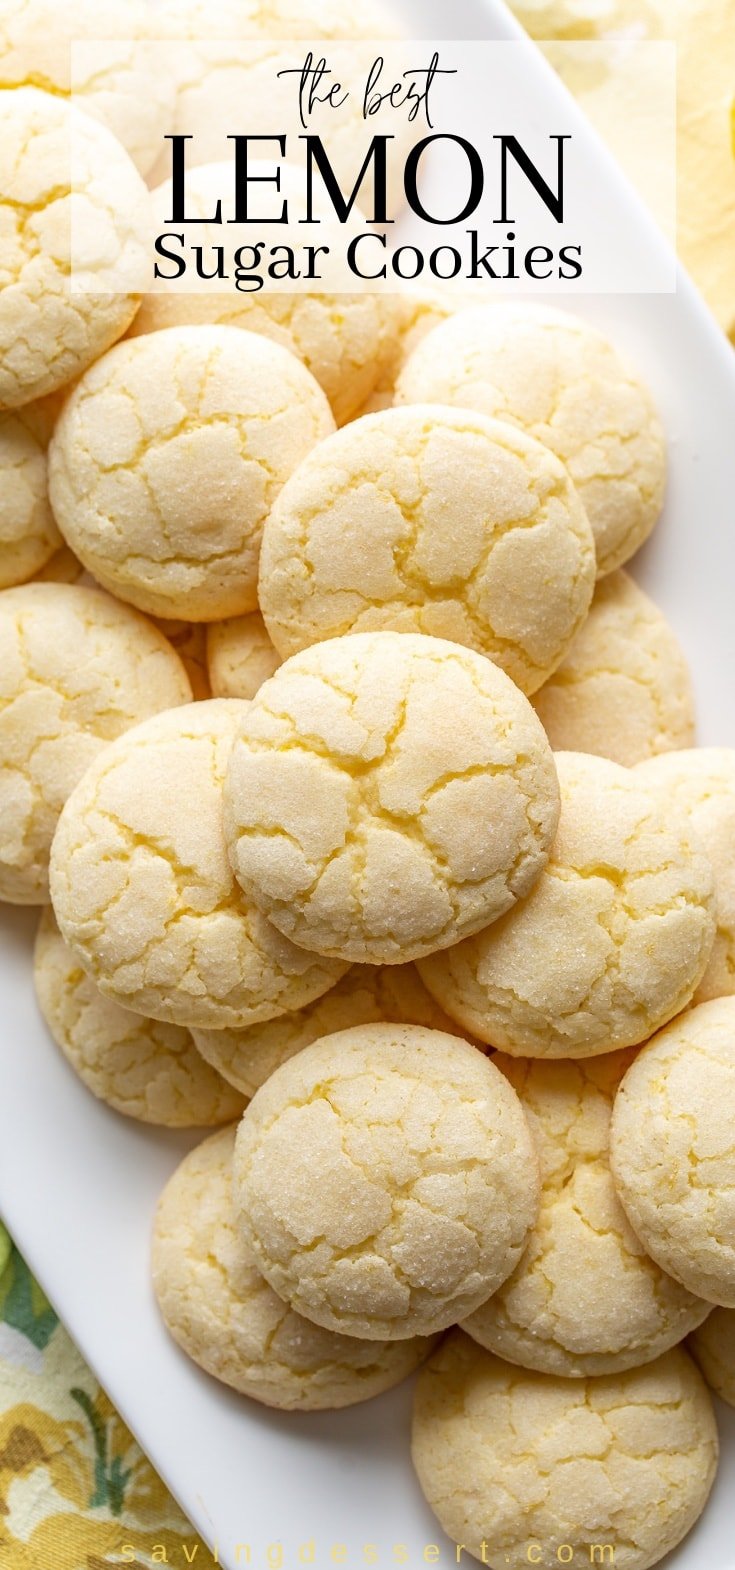 A platter of lemon sugar coated cookies with cracks on top